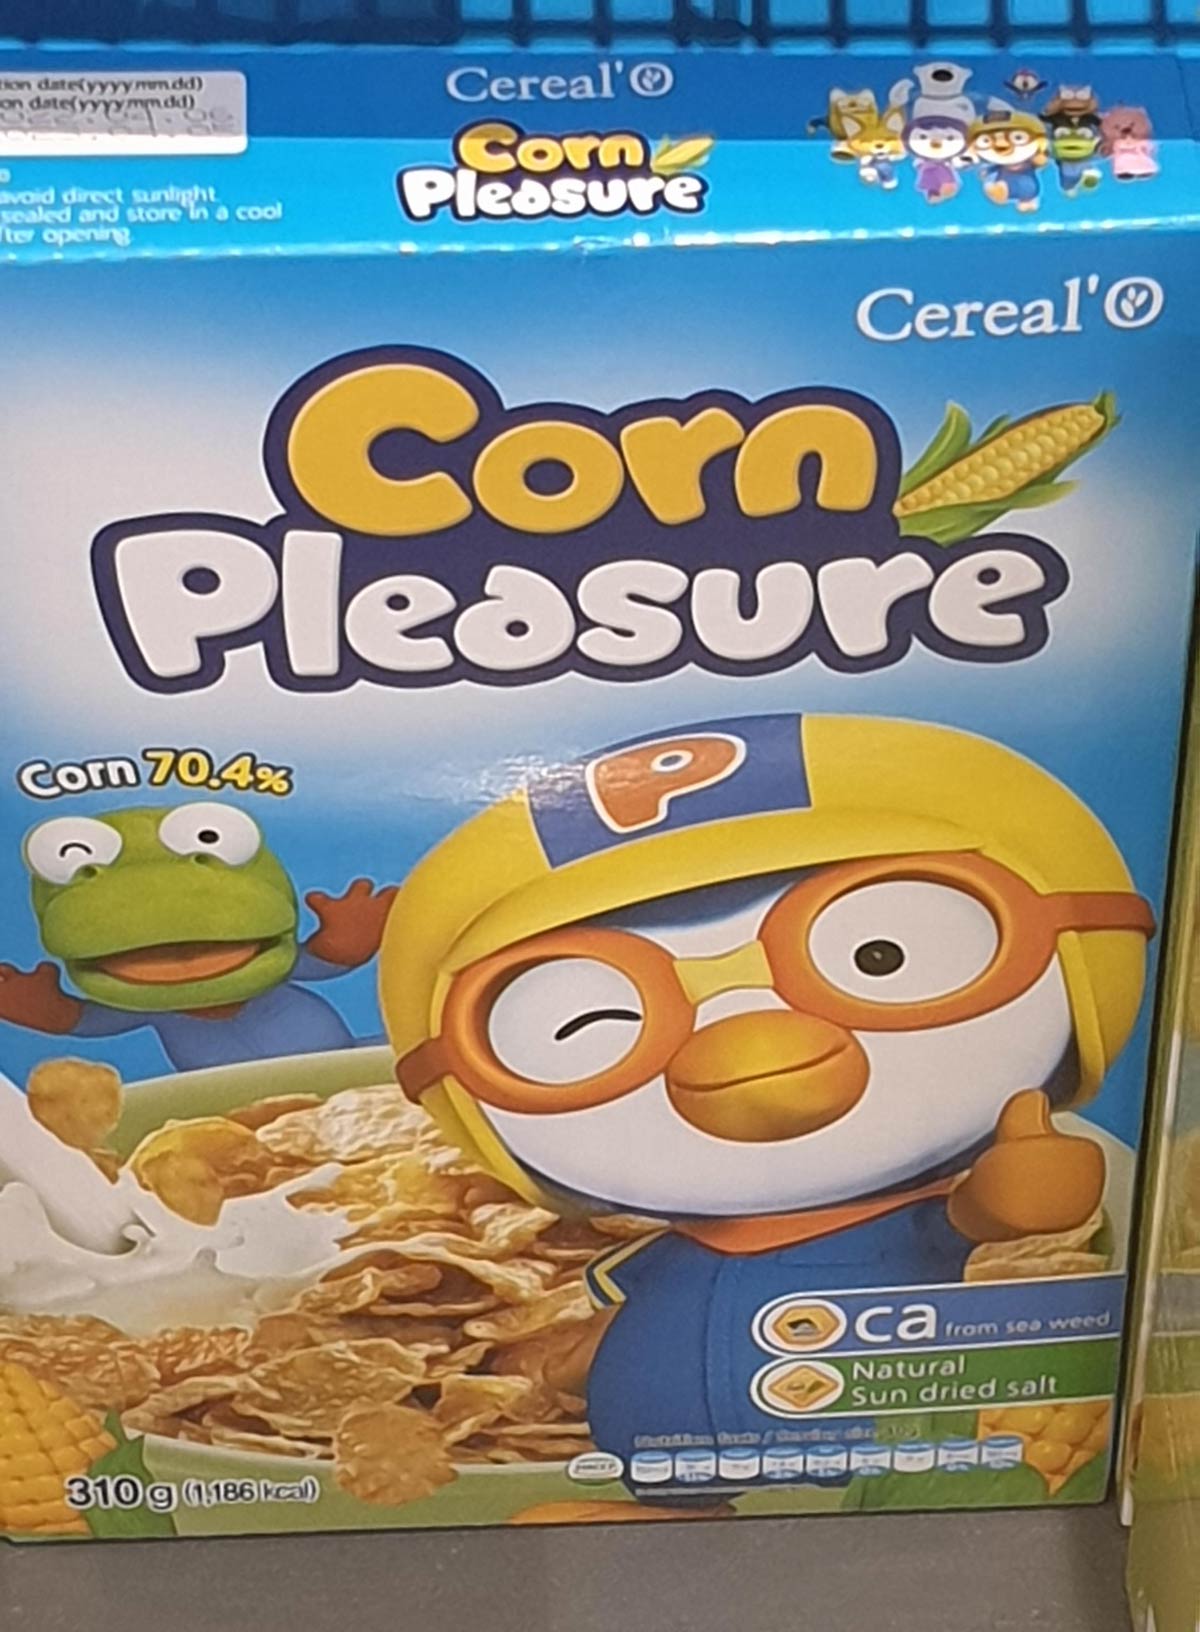 This cereal i came across